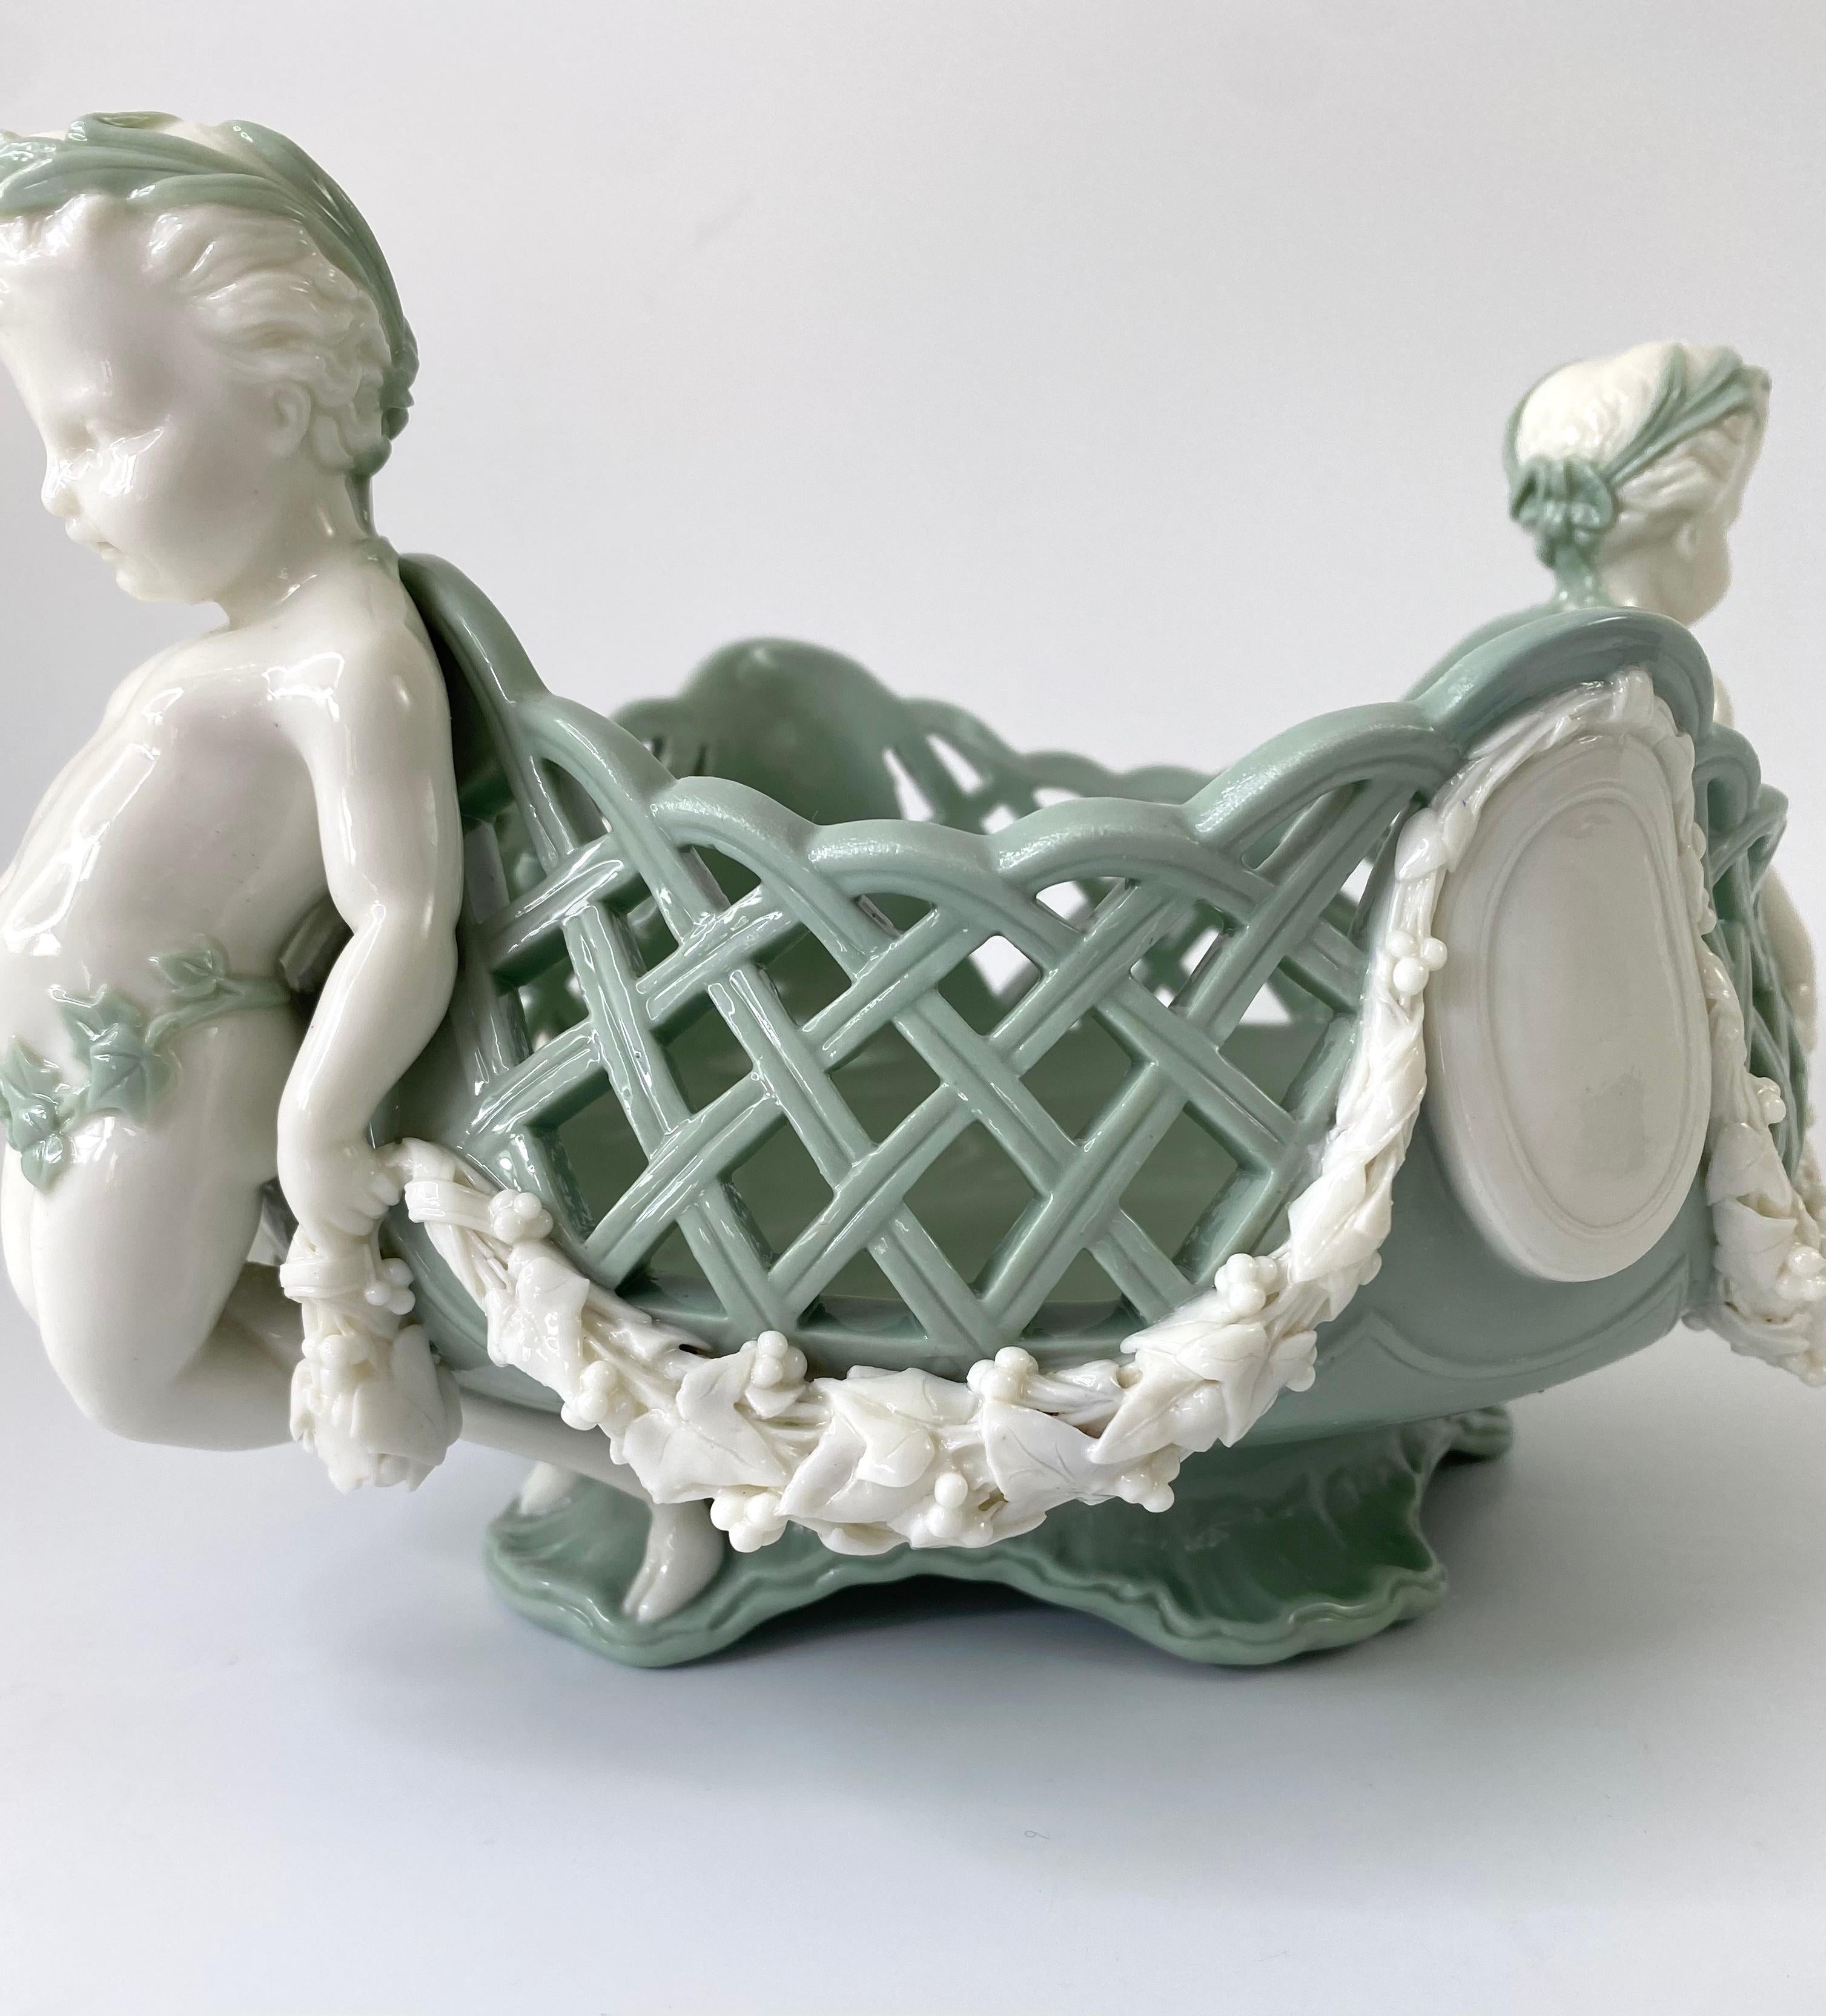 Fired Minton Pate Sur Pate Porcelain Basket, Dated 1867 For Sale